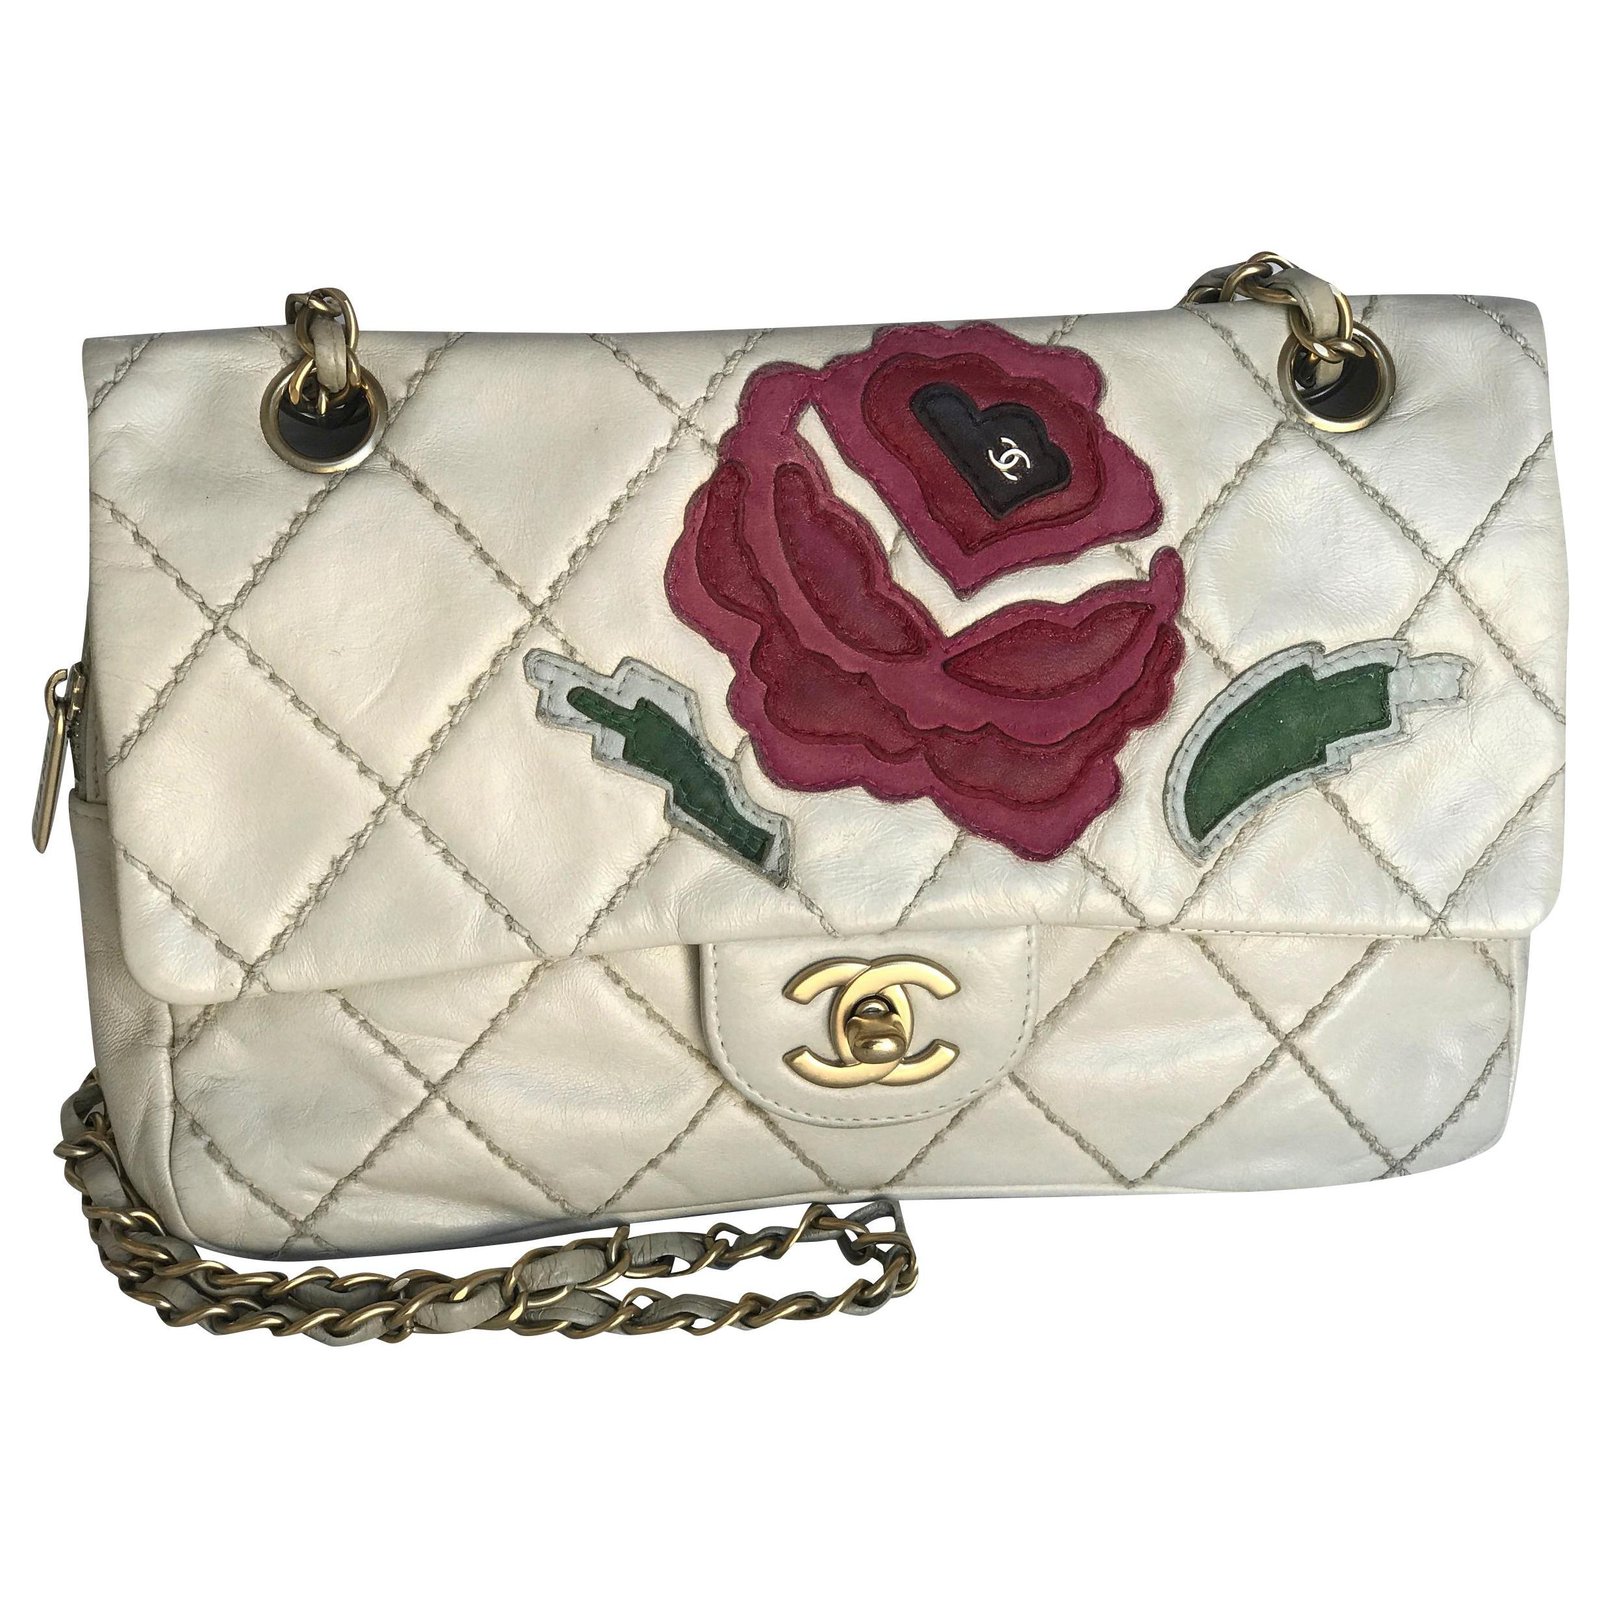 CHANEL, Bags, Chanel Rare Vintage Cream Fabric Camellia Flower Classic  Flap Bag Real Gold Hw